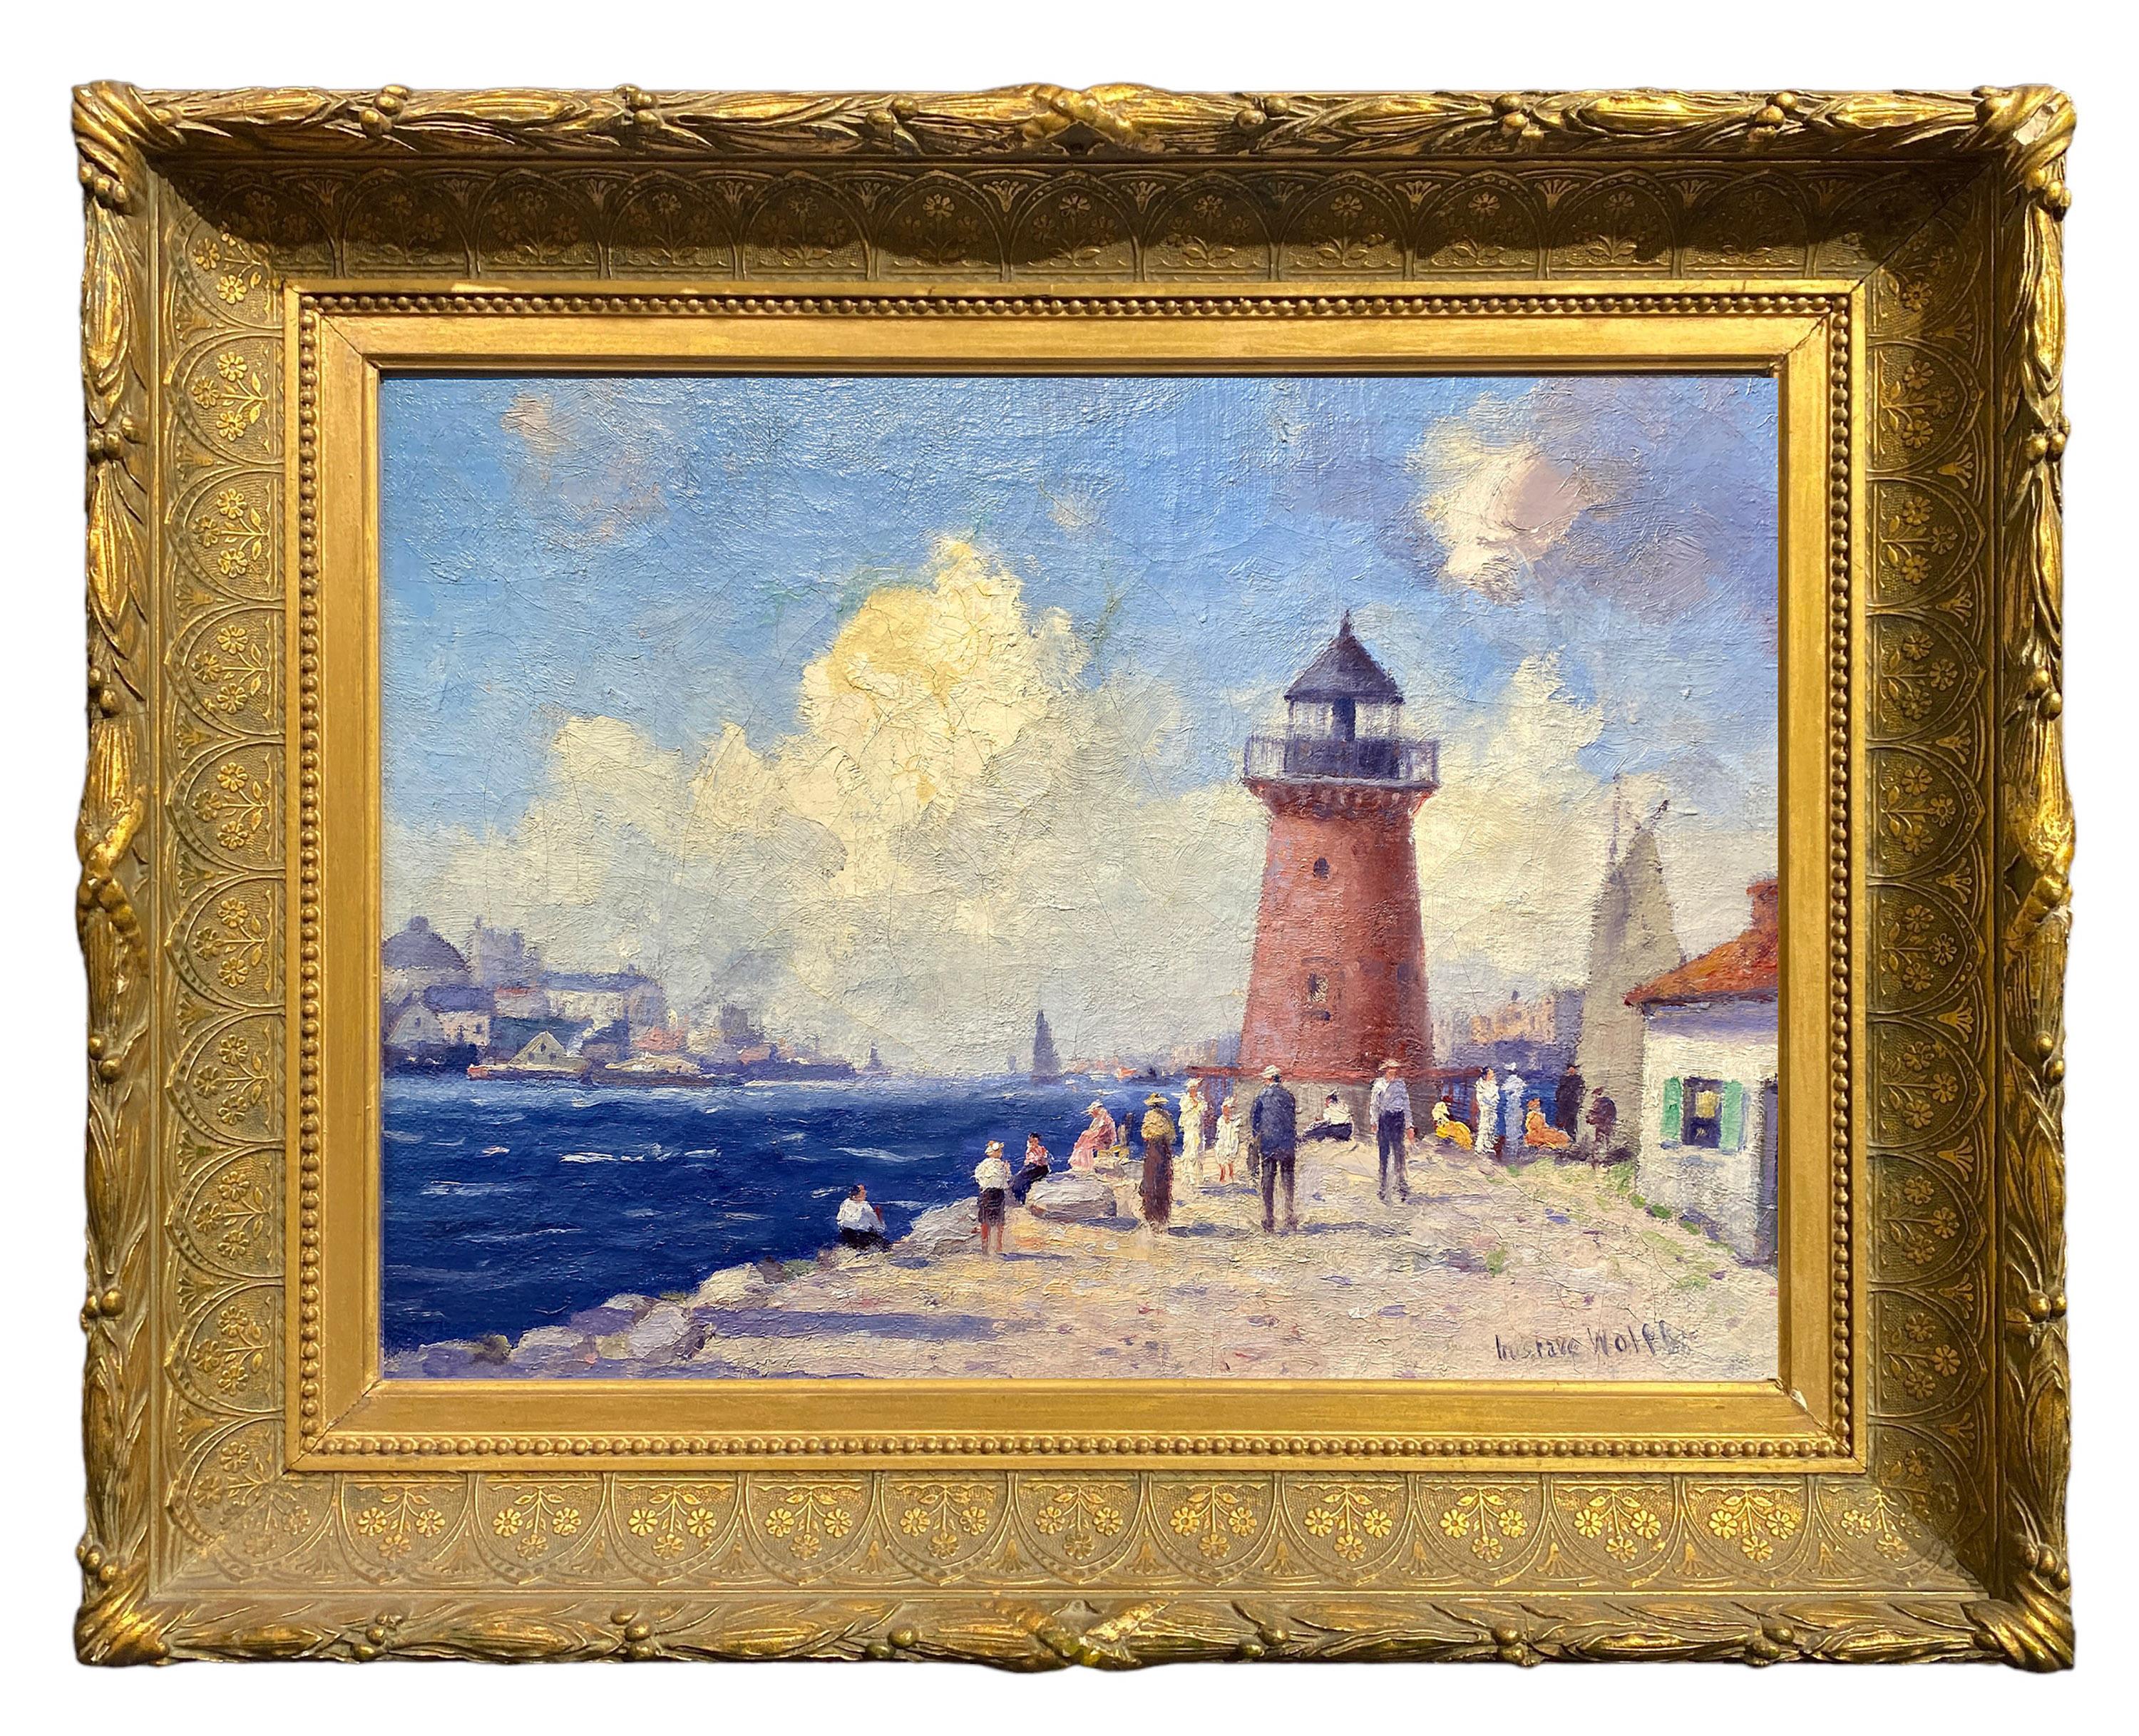 The Little Red Lighthouse, New York - Painting by Gustave Wolff 